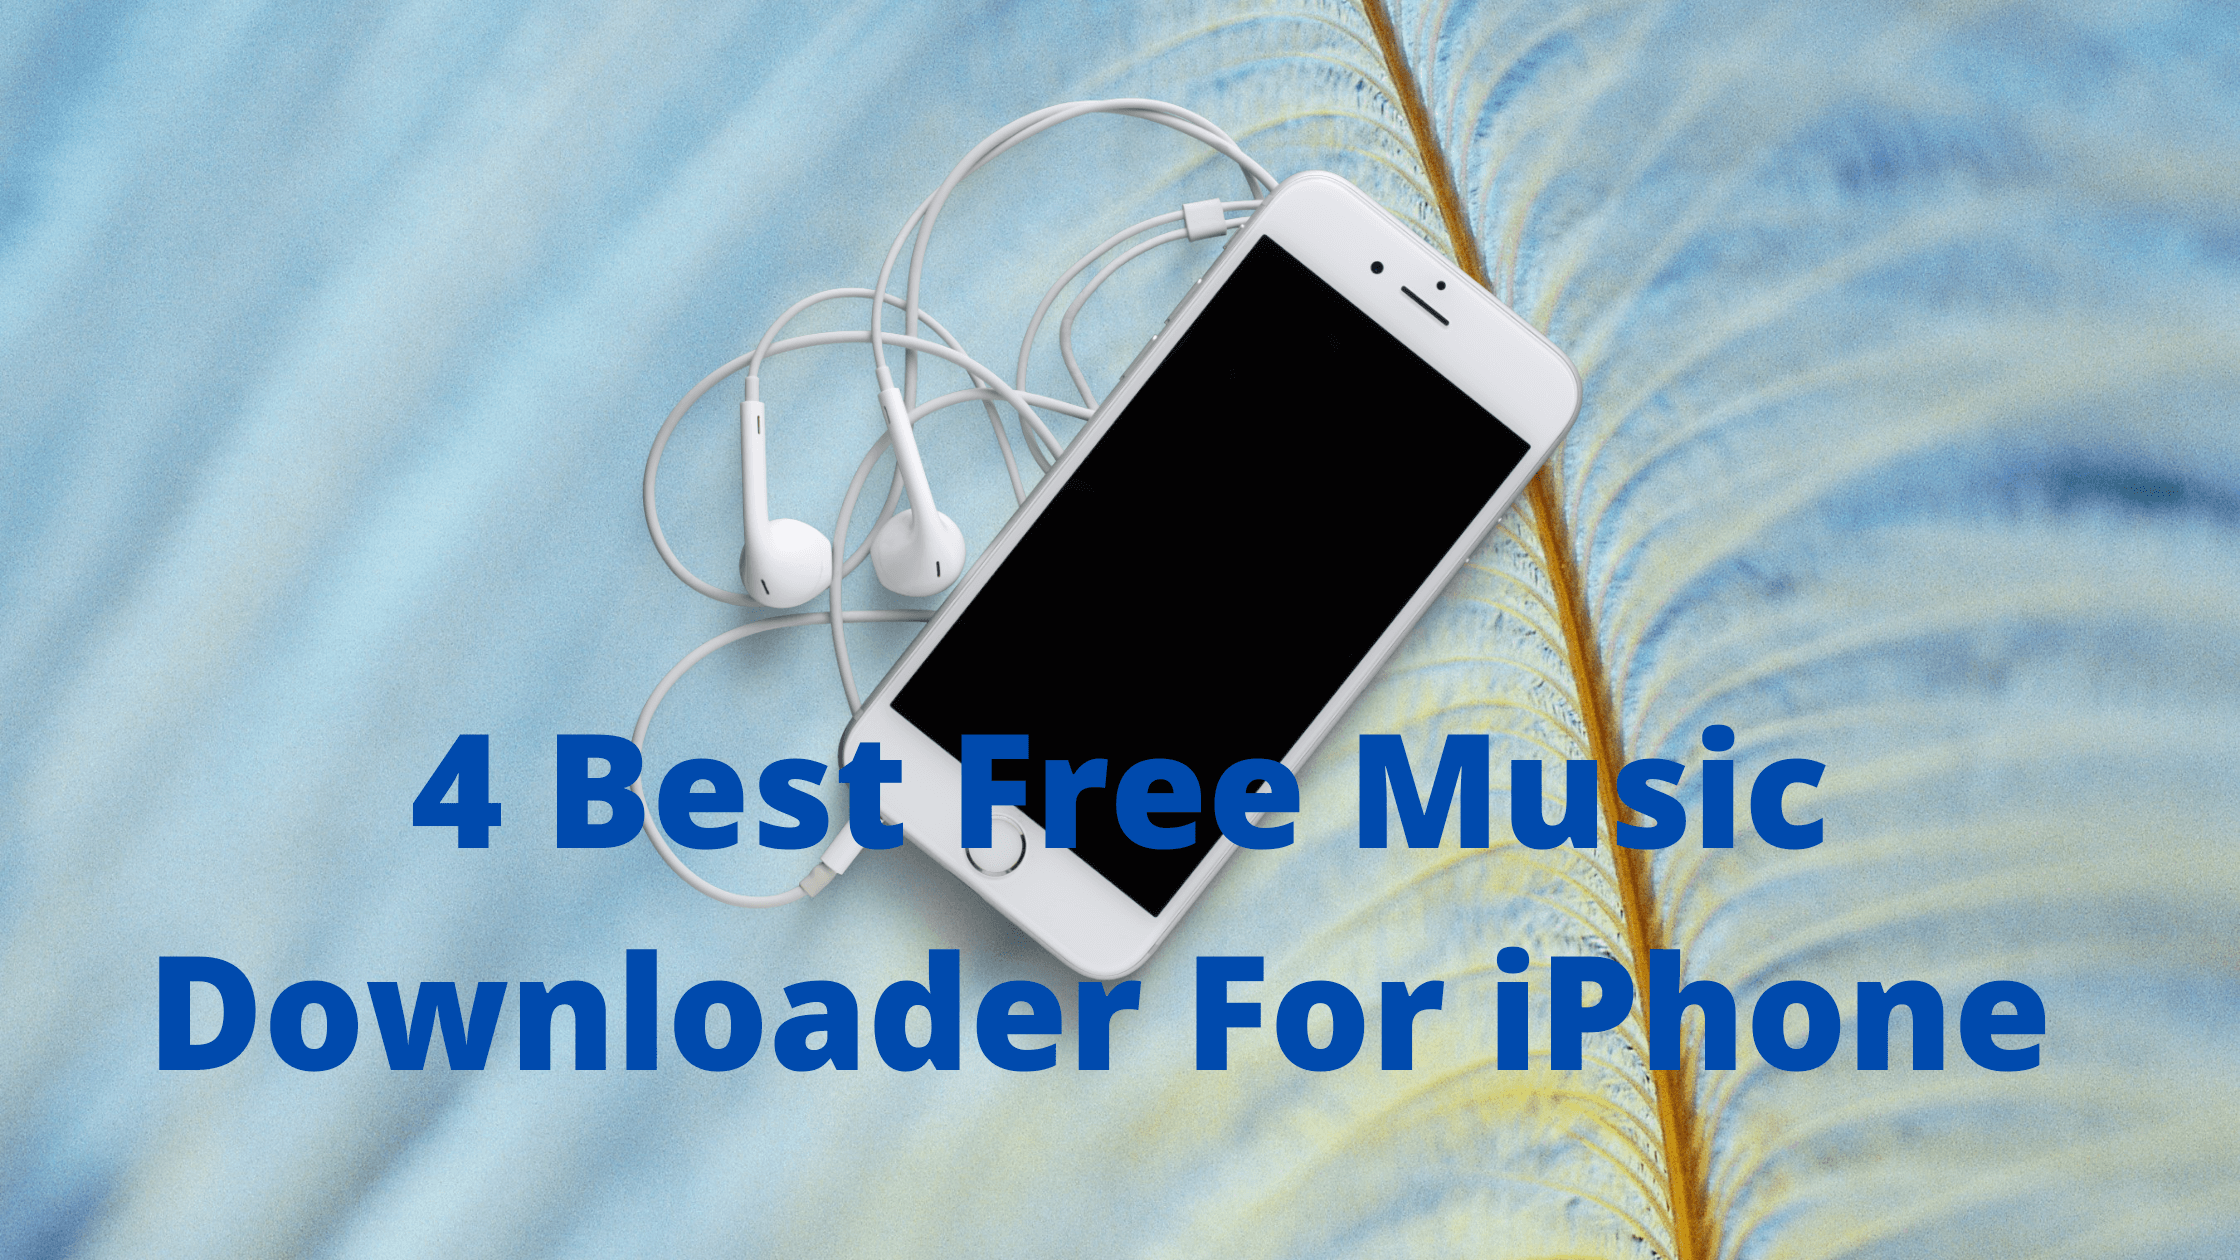 4 Best Free Music Downloader For iPhone